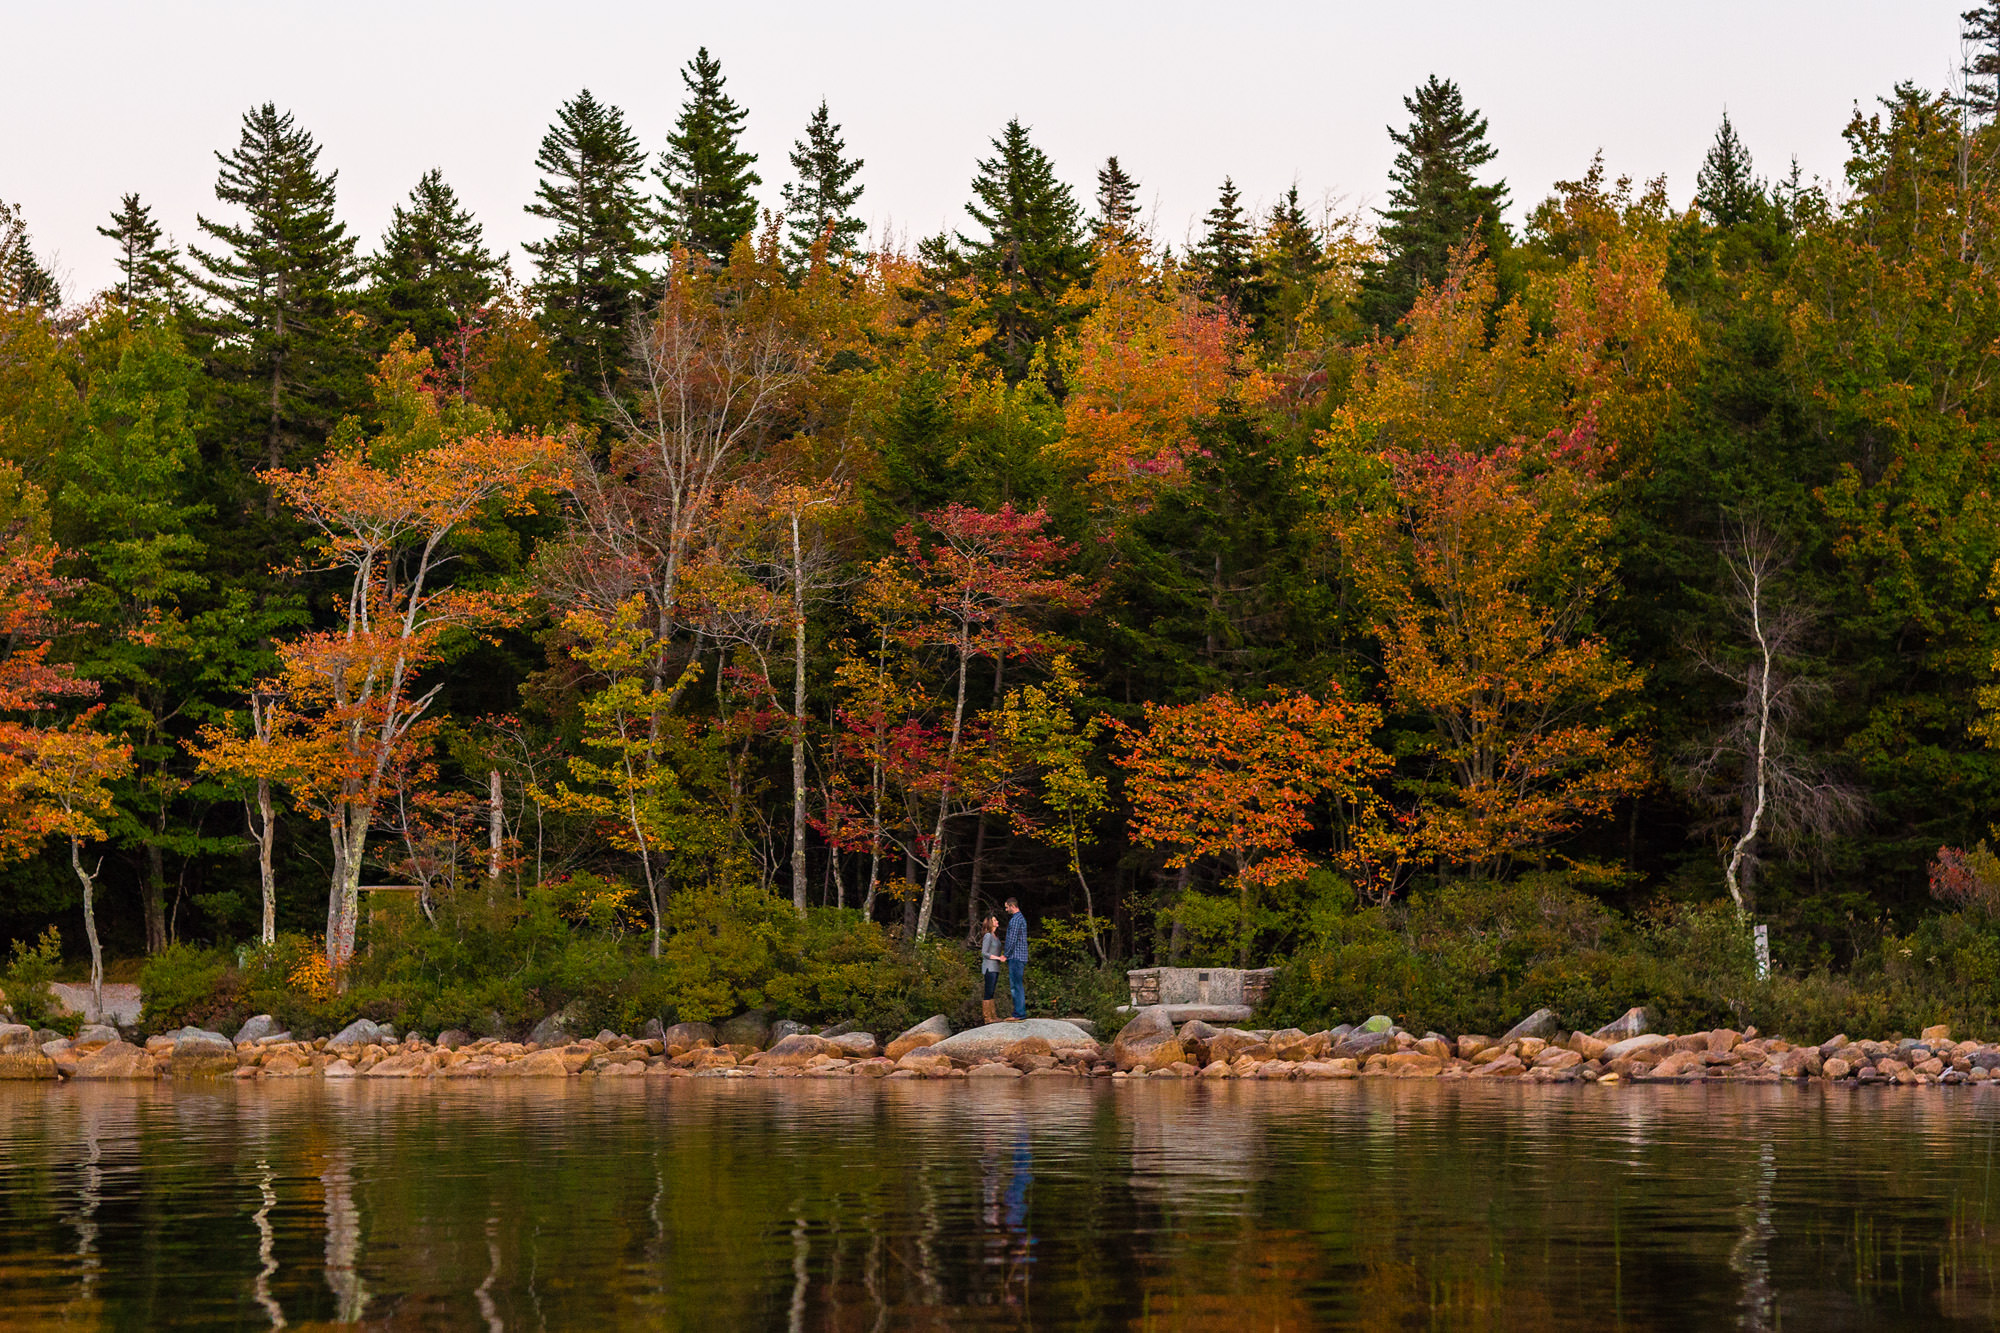 The foliage is spectacular at Jaimie and Cory's engagement session at Jordan Pond in Acadia